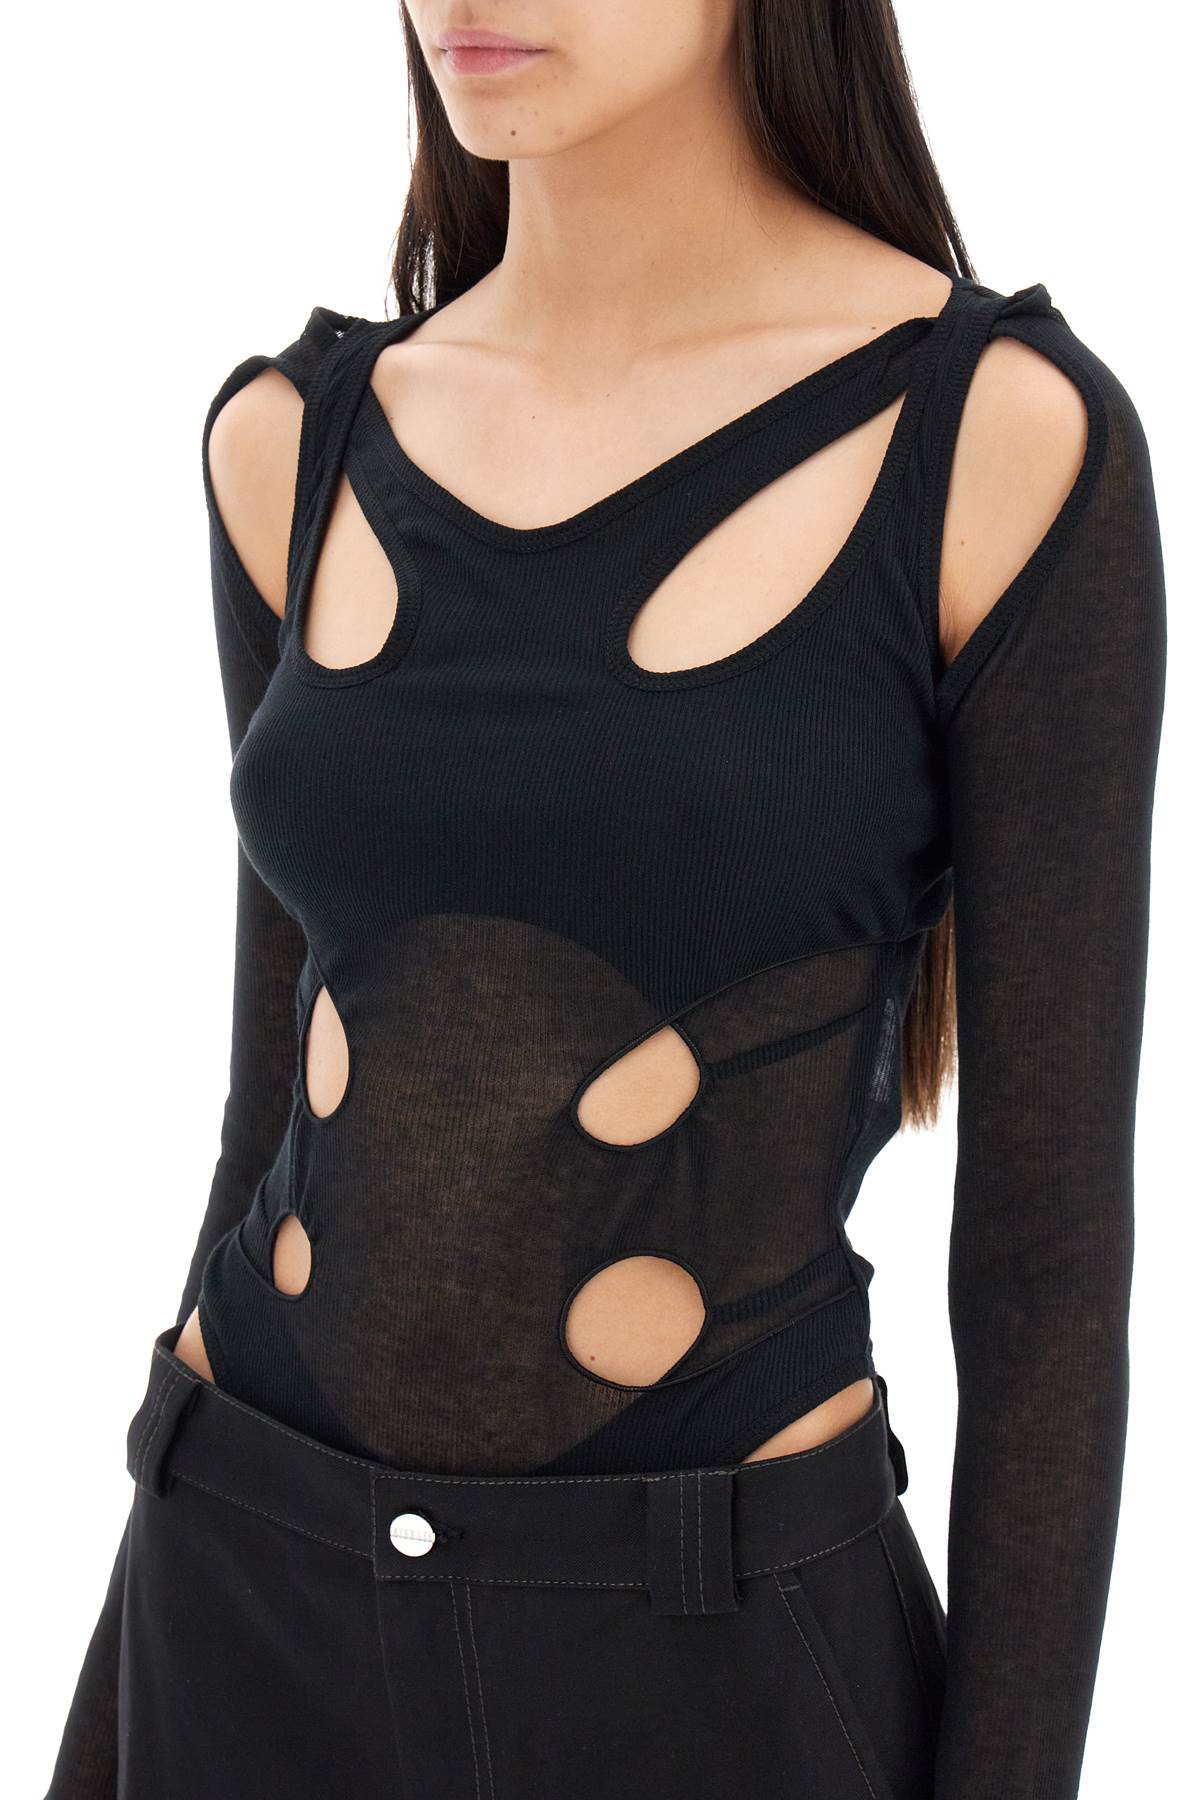 Dion lee long-sleeved bodysuit with cut-outs-3